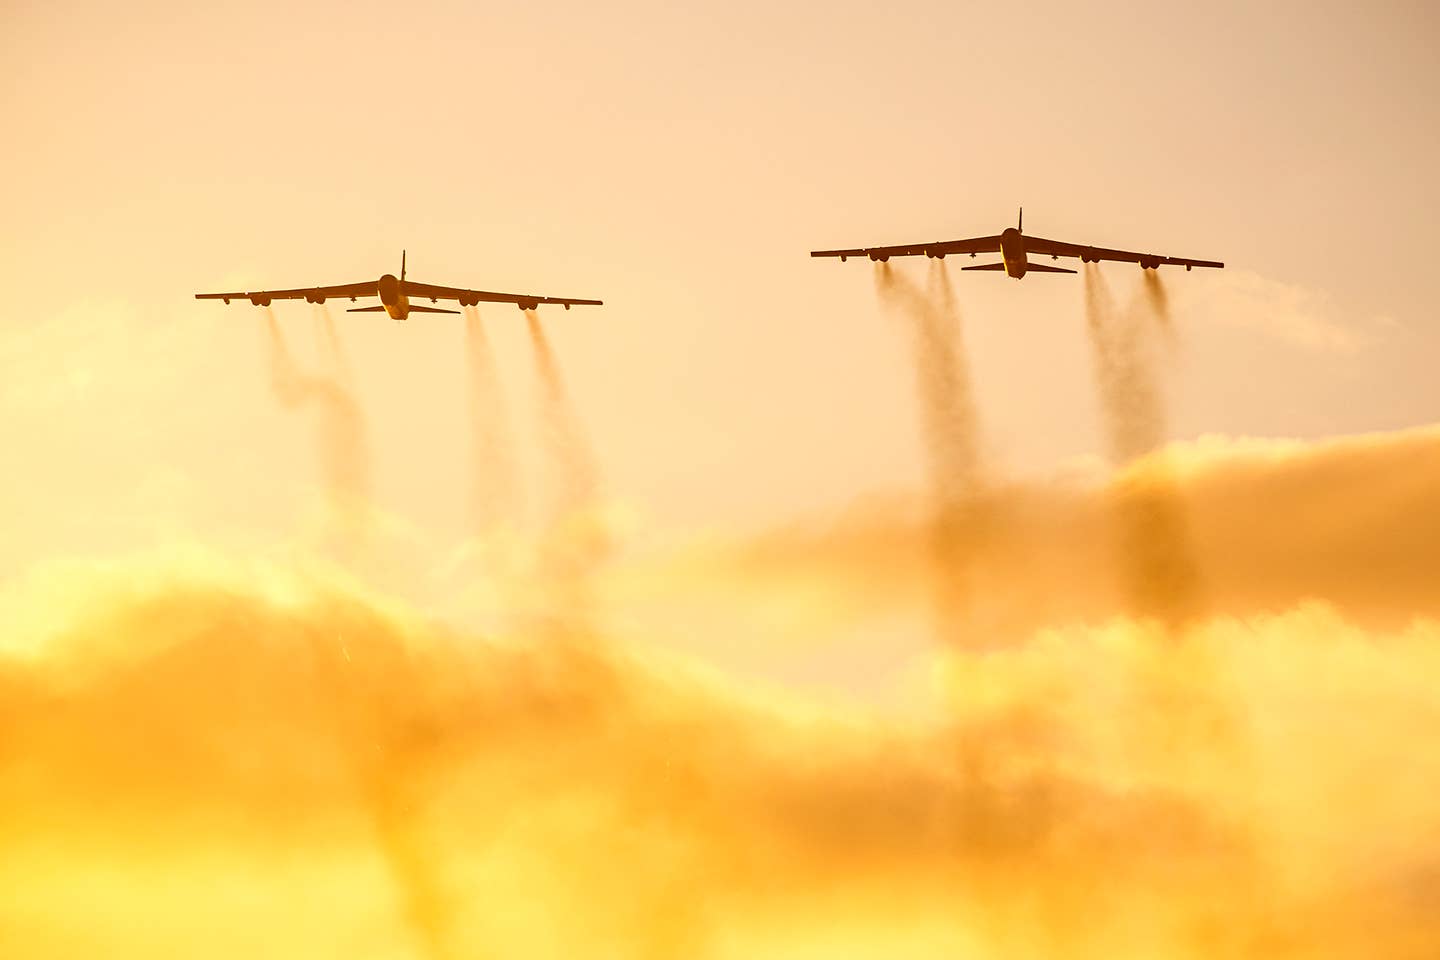 Two B-52 Stratofortressess fly overhead at RAF Fairford, England, on Aug. 22, 2020. Strategic bombers contribute to stability in the European theater as they are intended to deter conflict rather than instigate it. <em>Credit: U.S. Air Force photo by Senior Airman Eugene Oliver</em>